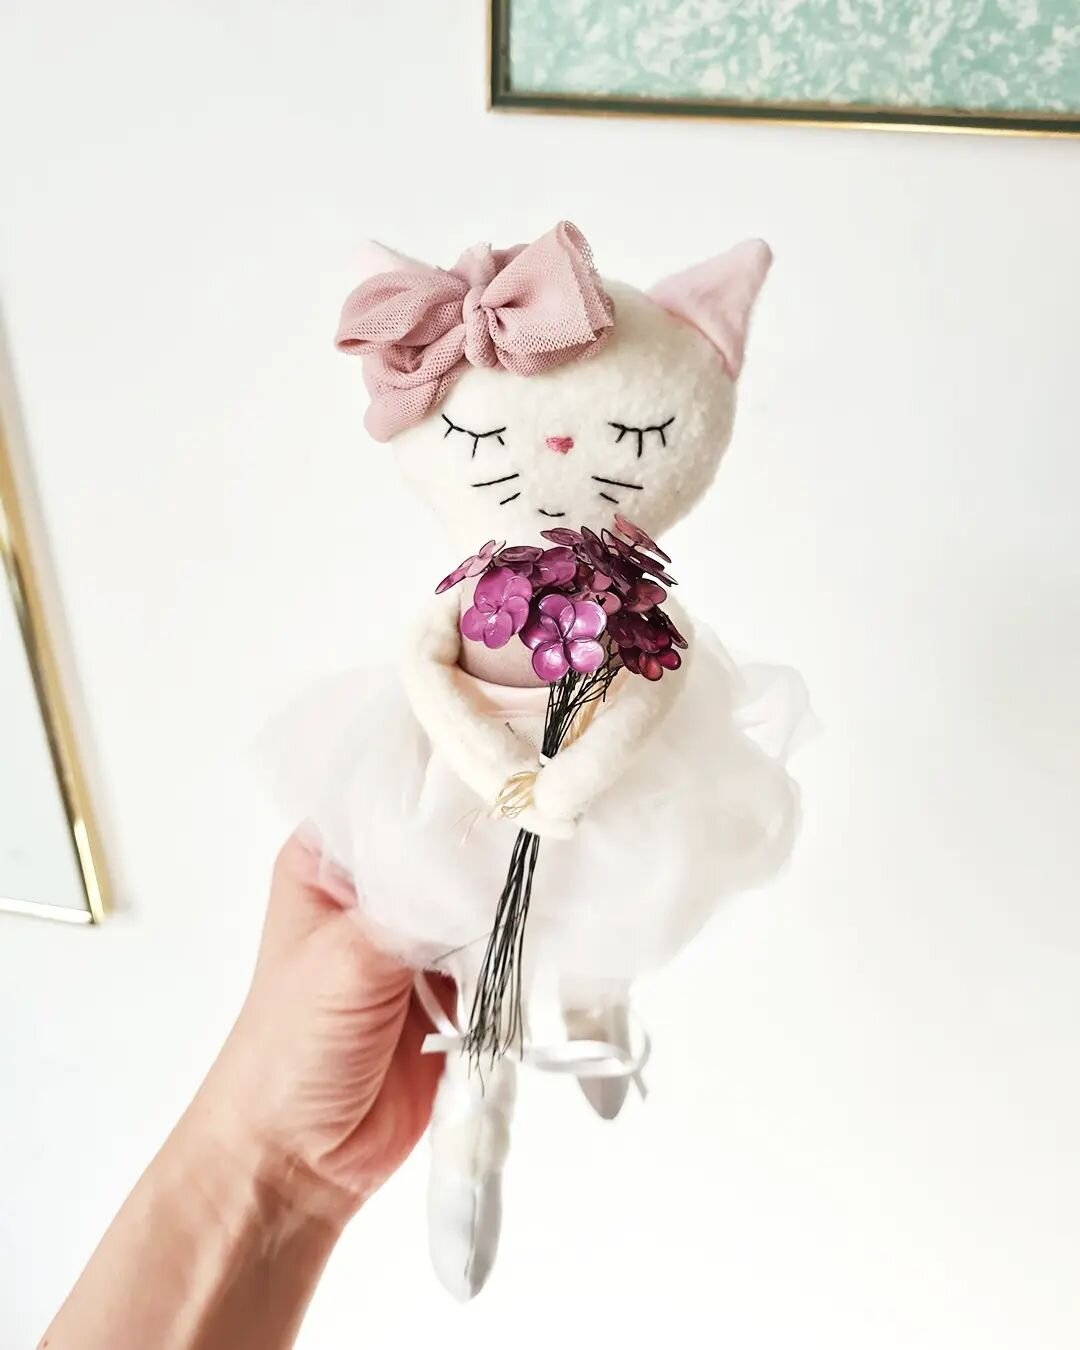 The newest tutorial by RuBYsundIrmAsStudio is online! Here you can find out how you can make these cute little colorful wire flowers.

Miss Kitten loves flowers and really wanted to take a few photos with the sweet flowers at the photo shoot. And are